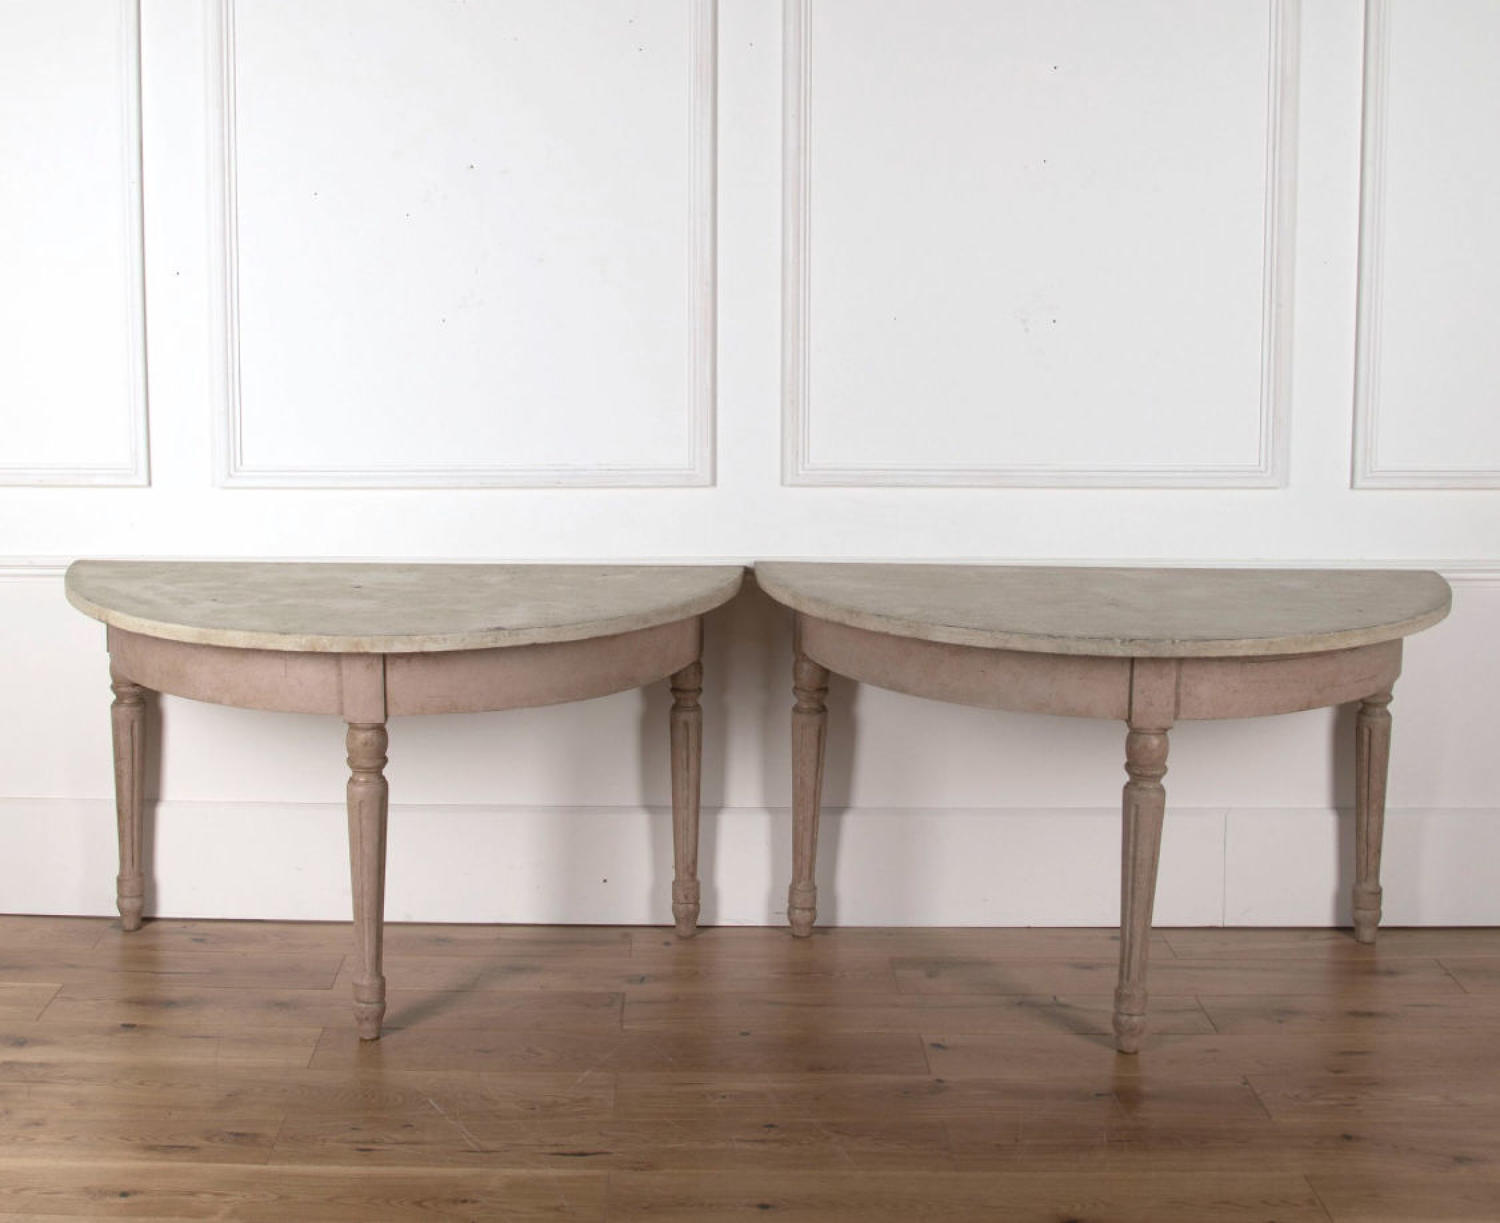 A pair of Painted Demi Lune Tables